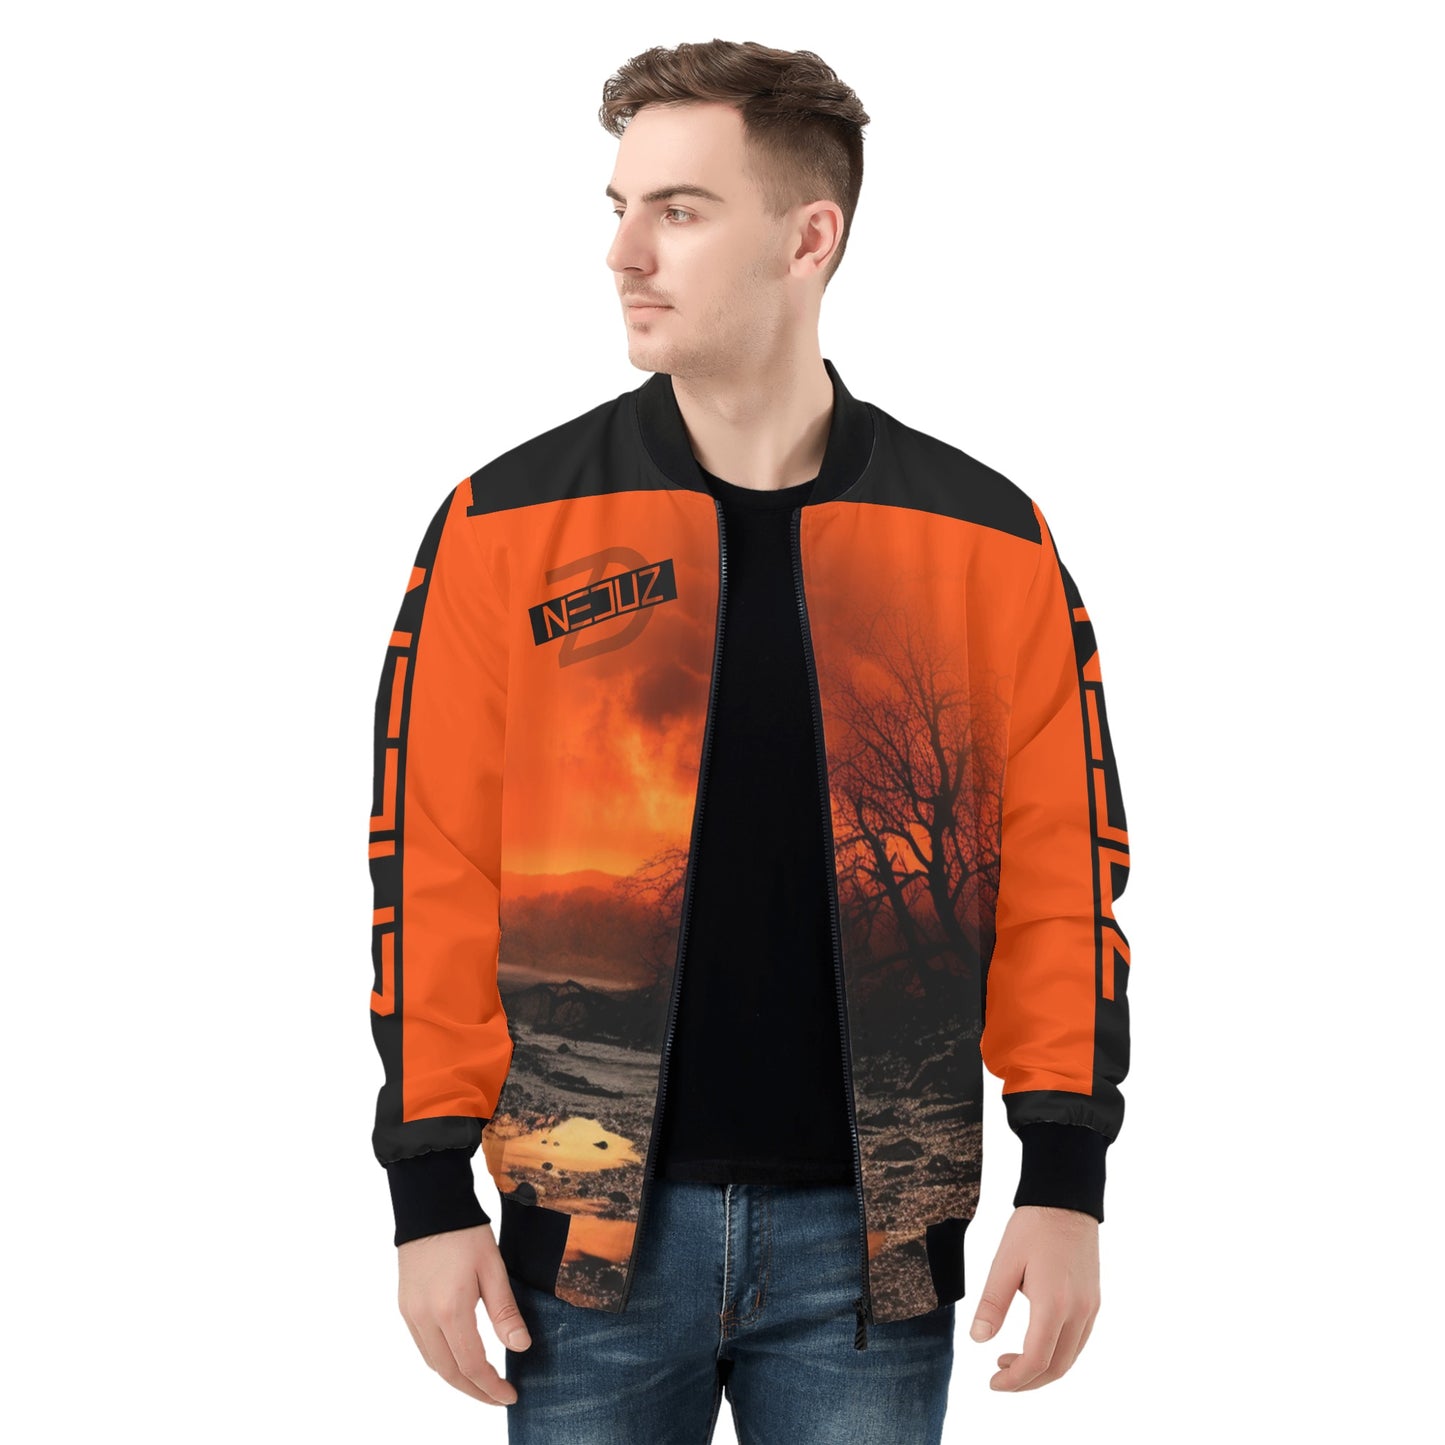 Neduz Mens Crimson Sun Zip Up Bomber Jacket: Show Off Your Style and Stay Warm with Our Unique and High-Quality Design